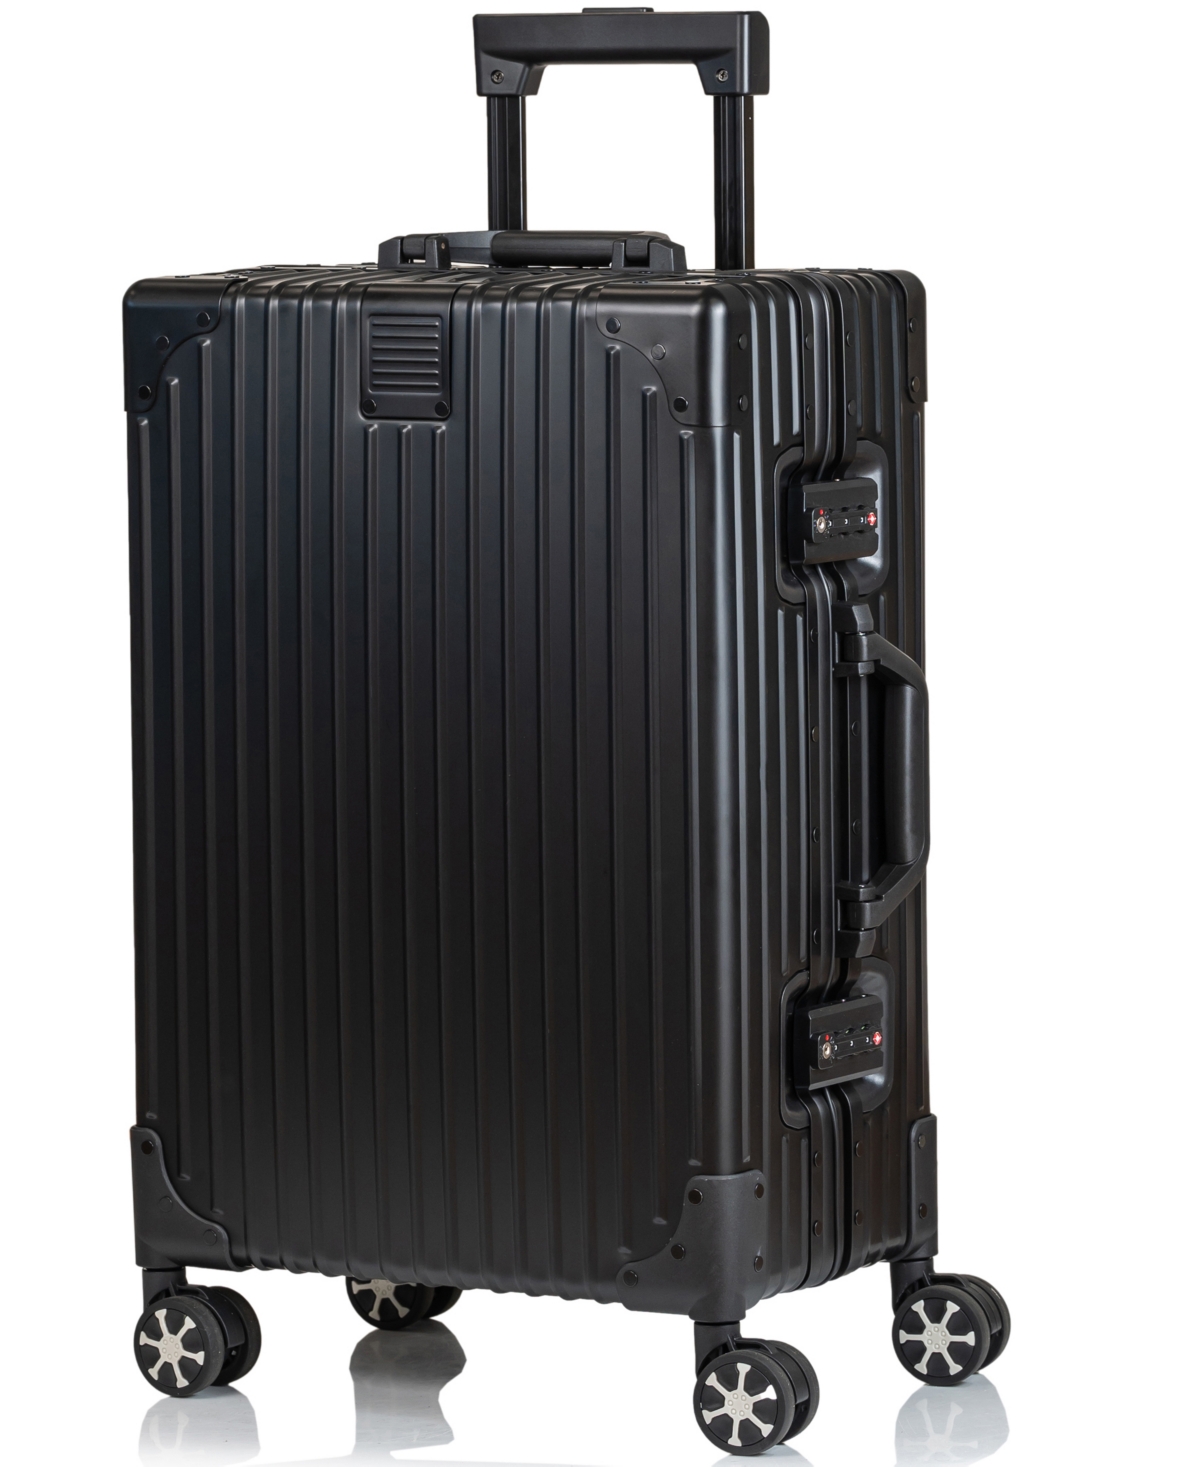 Champs Elite Hardside Carry-on Luggage In Black